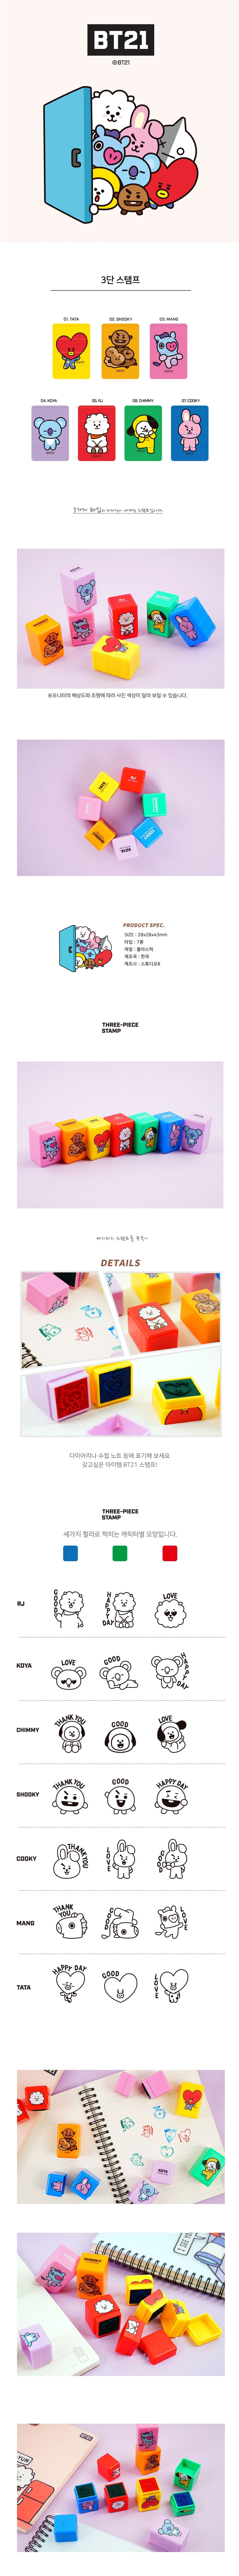 BT21 3-in-1 stamp